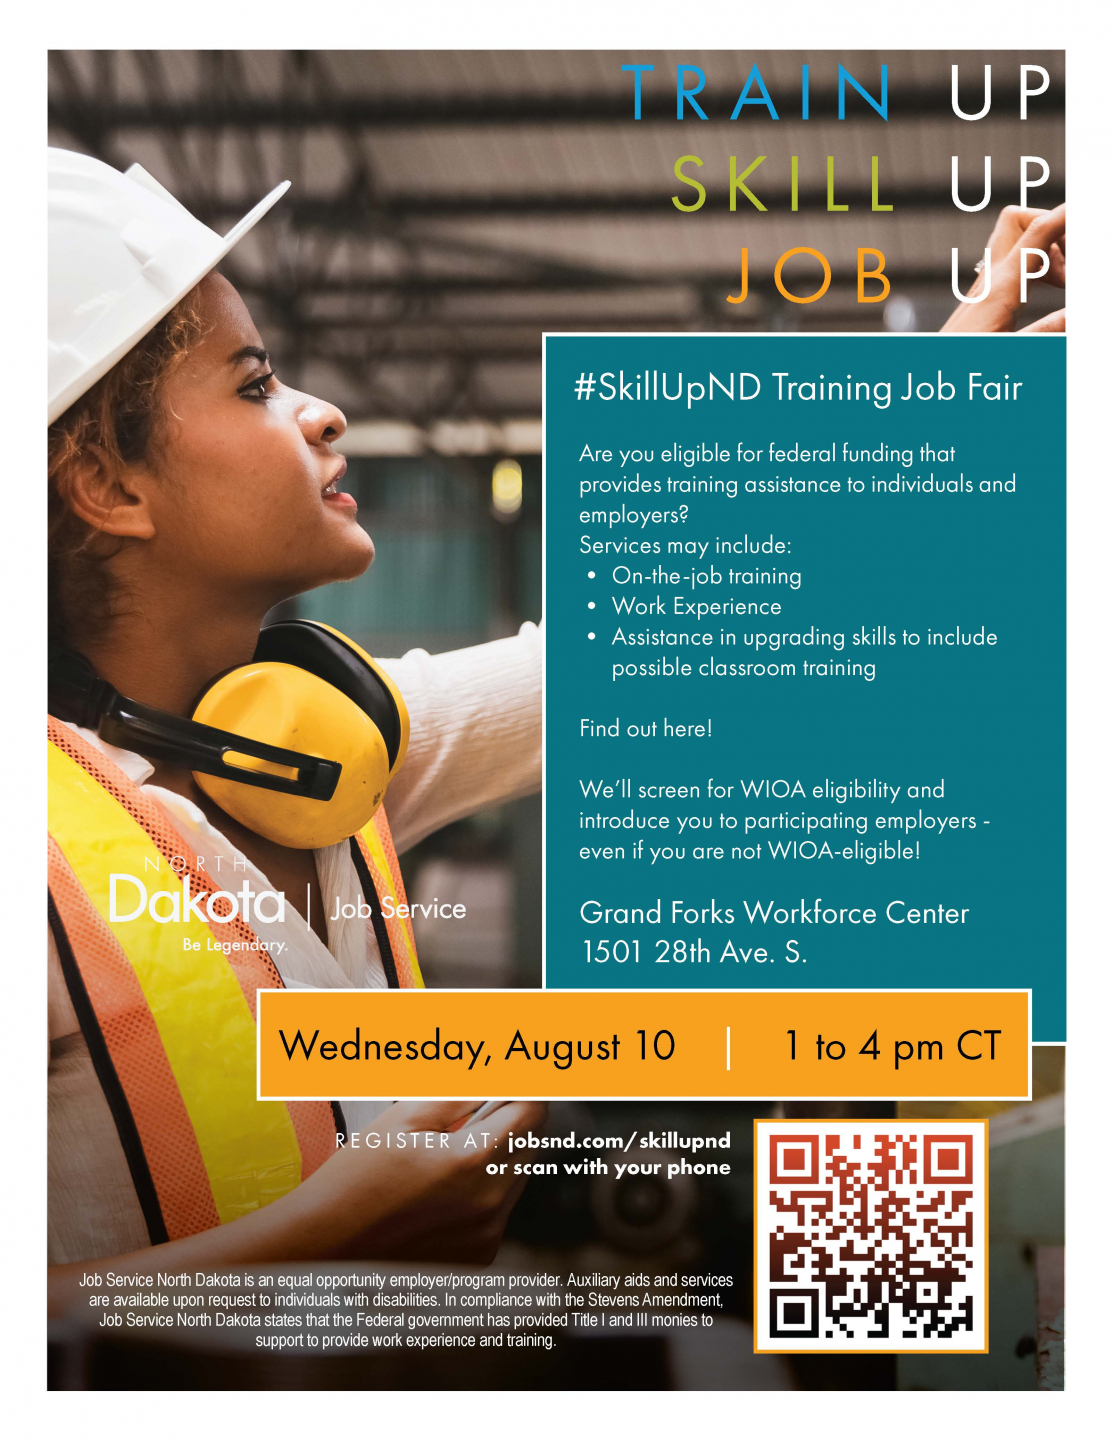 Skill Up ND Job Fair August 10 from 1 to 4 pm at Grand Forks Workforce Center